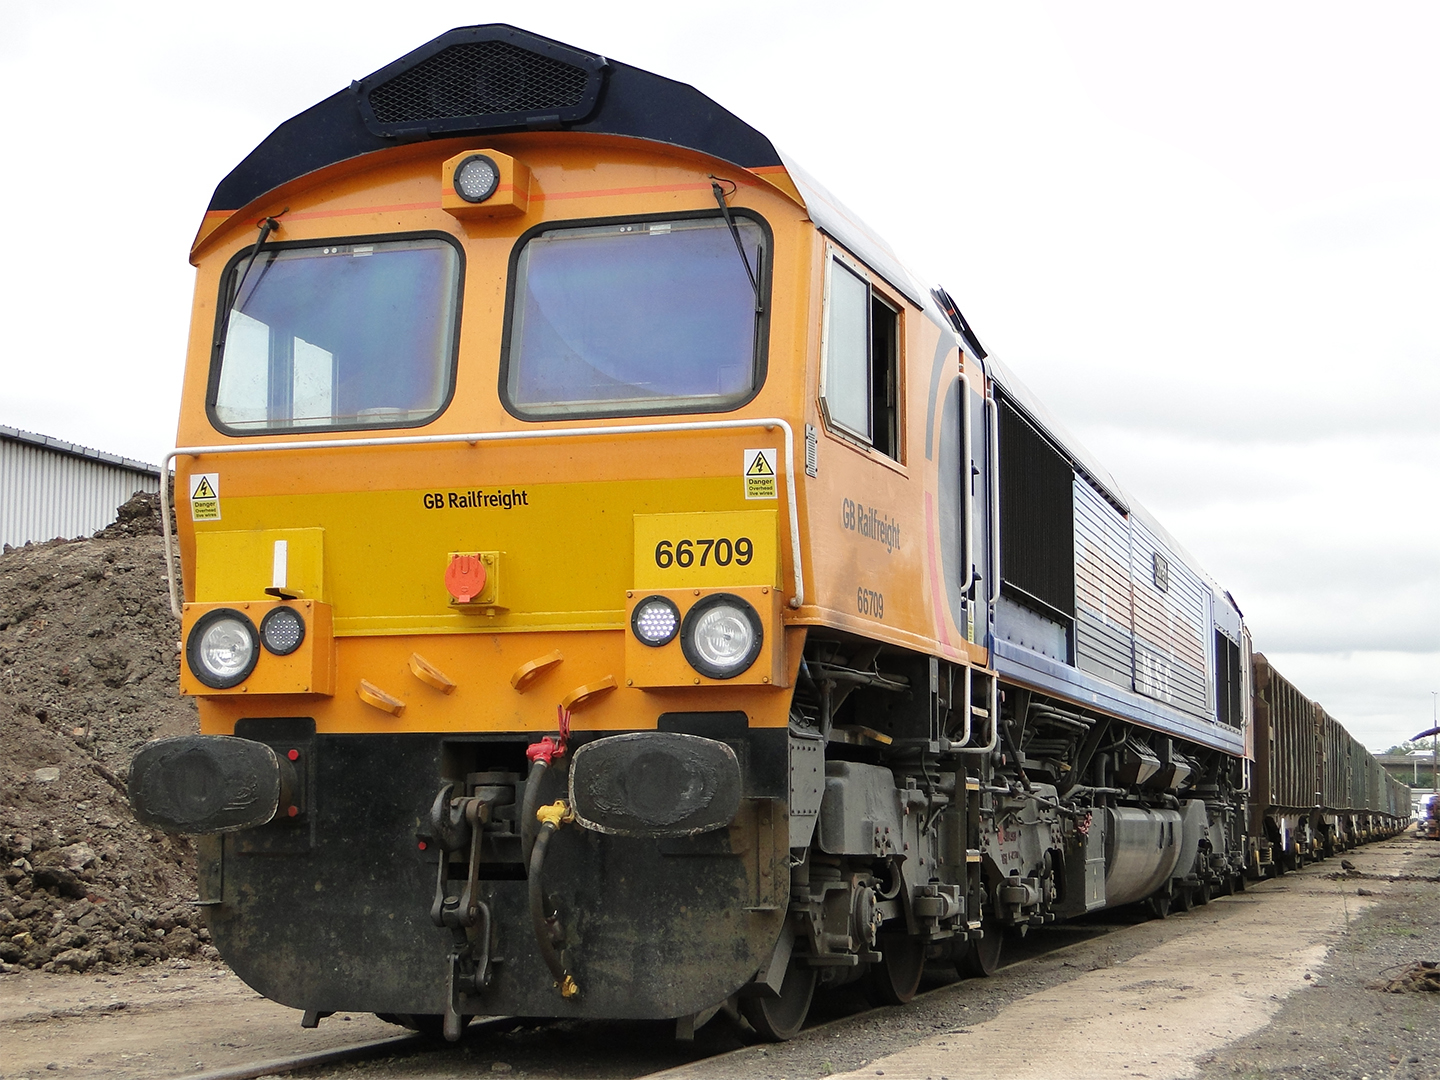 GB Railfreight resumes services between Cricklewood and Calvert